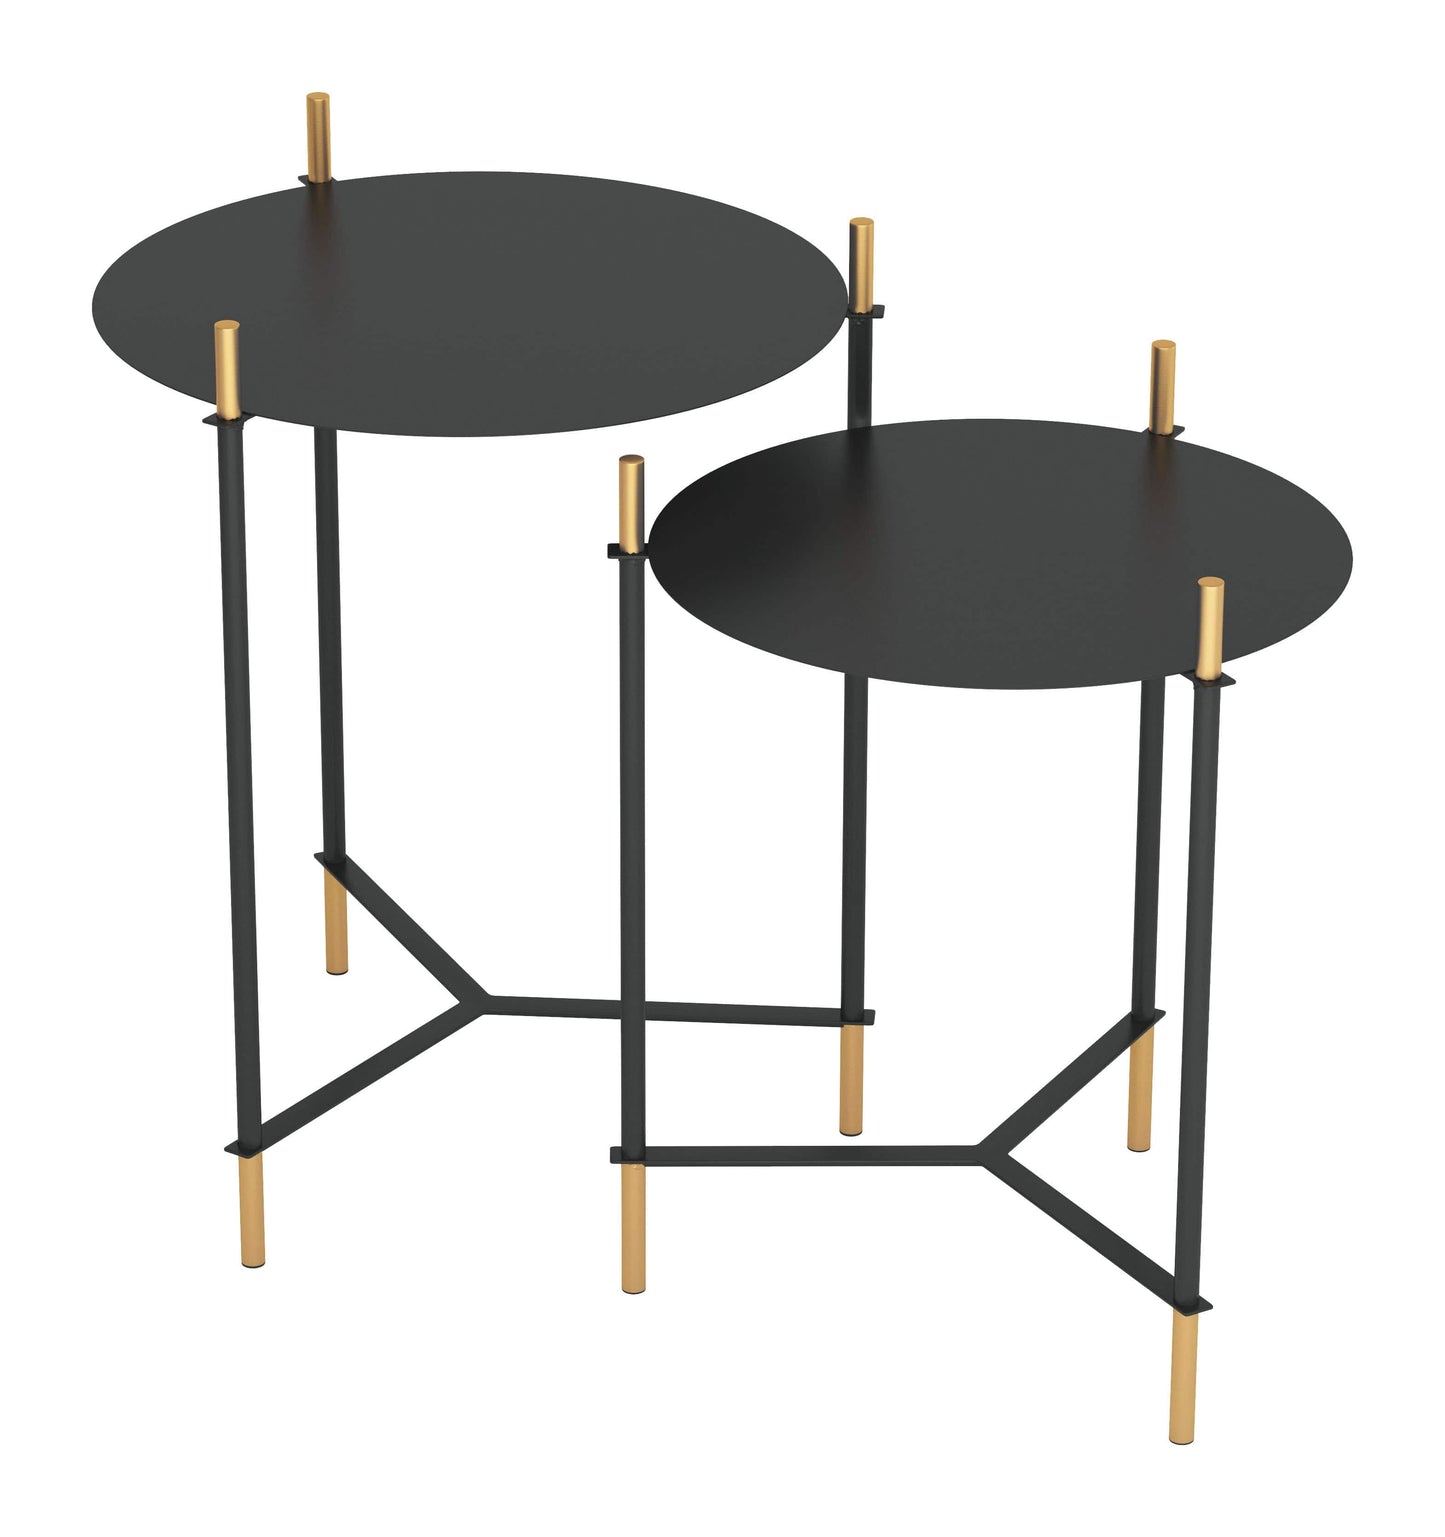 Set of 2 hospitality tables